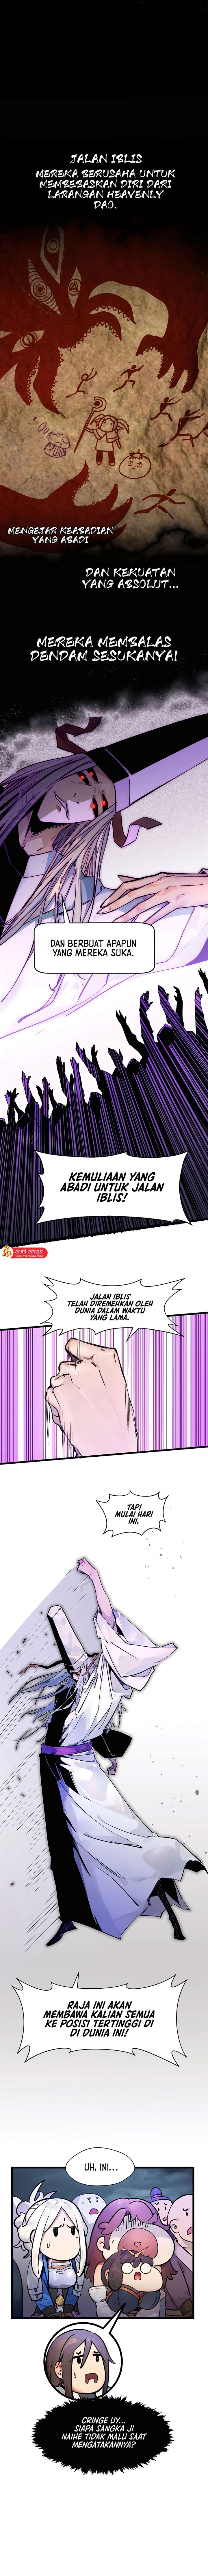 Dilarang COPAS - situs resmi www.mangacanblog.com - Komik top tier providence secretly cultivate for a thousand years 146 - chapter 146 147 Indonesia top tier providence secretly cultivate for a thousand years 146 - chapter 146 Terbaru 1|Baca Manga Komik Indonesia|Mangacan